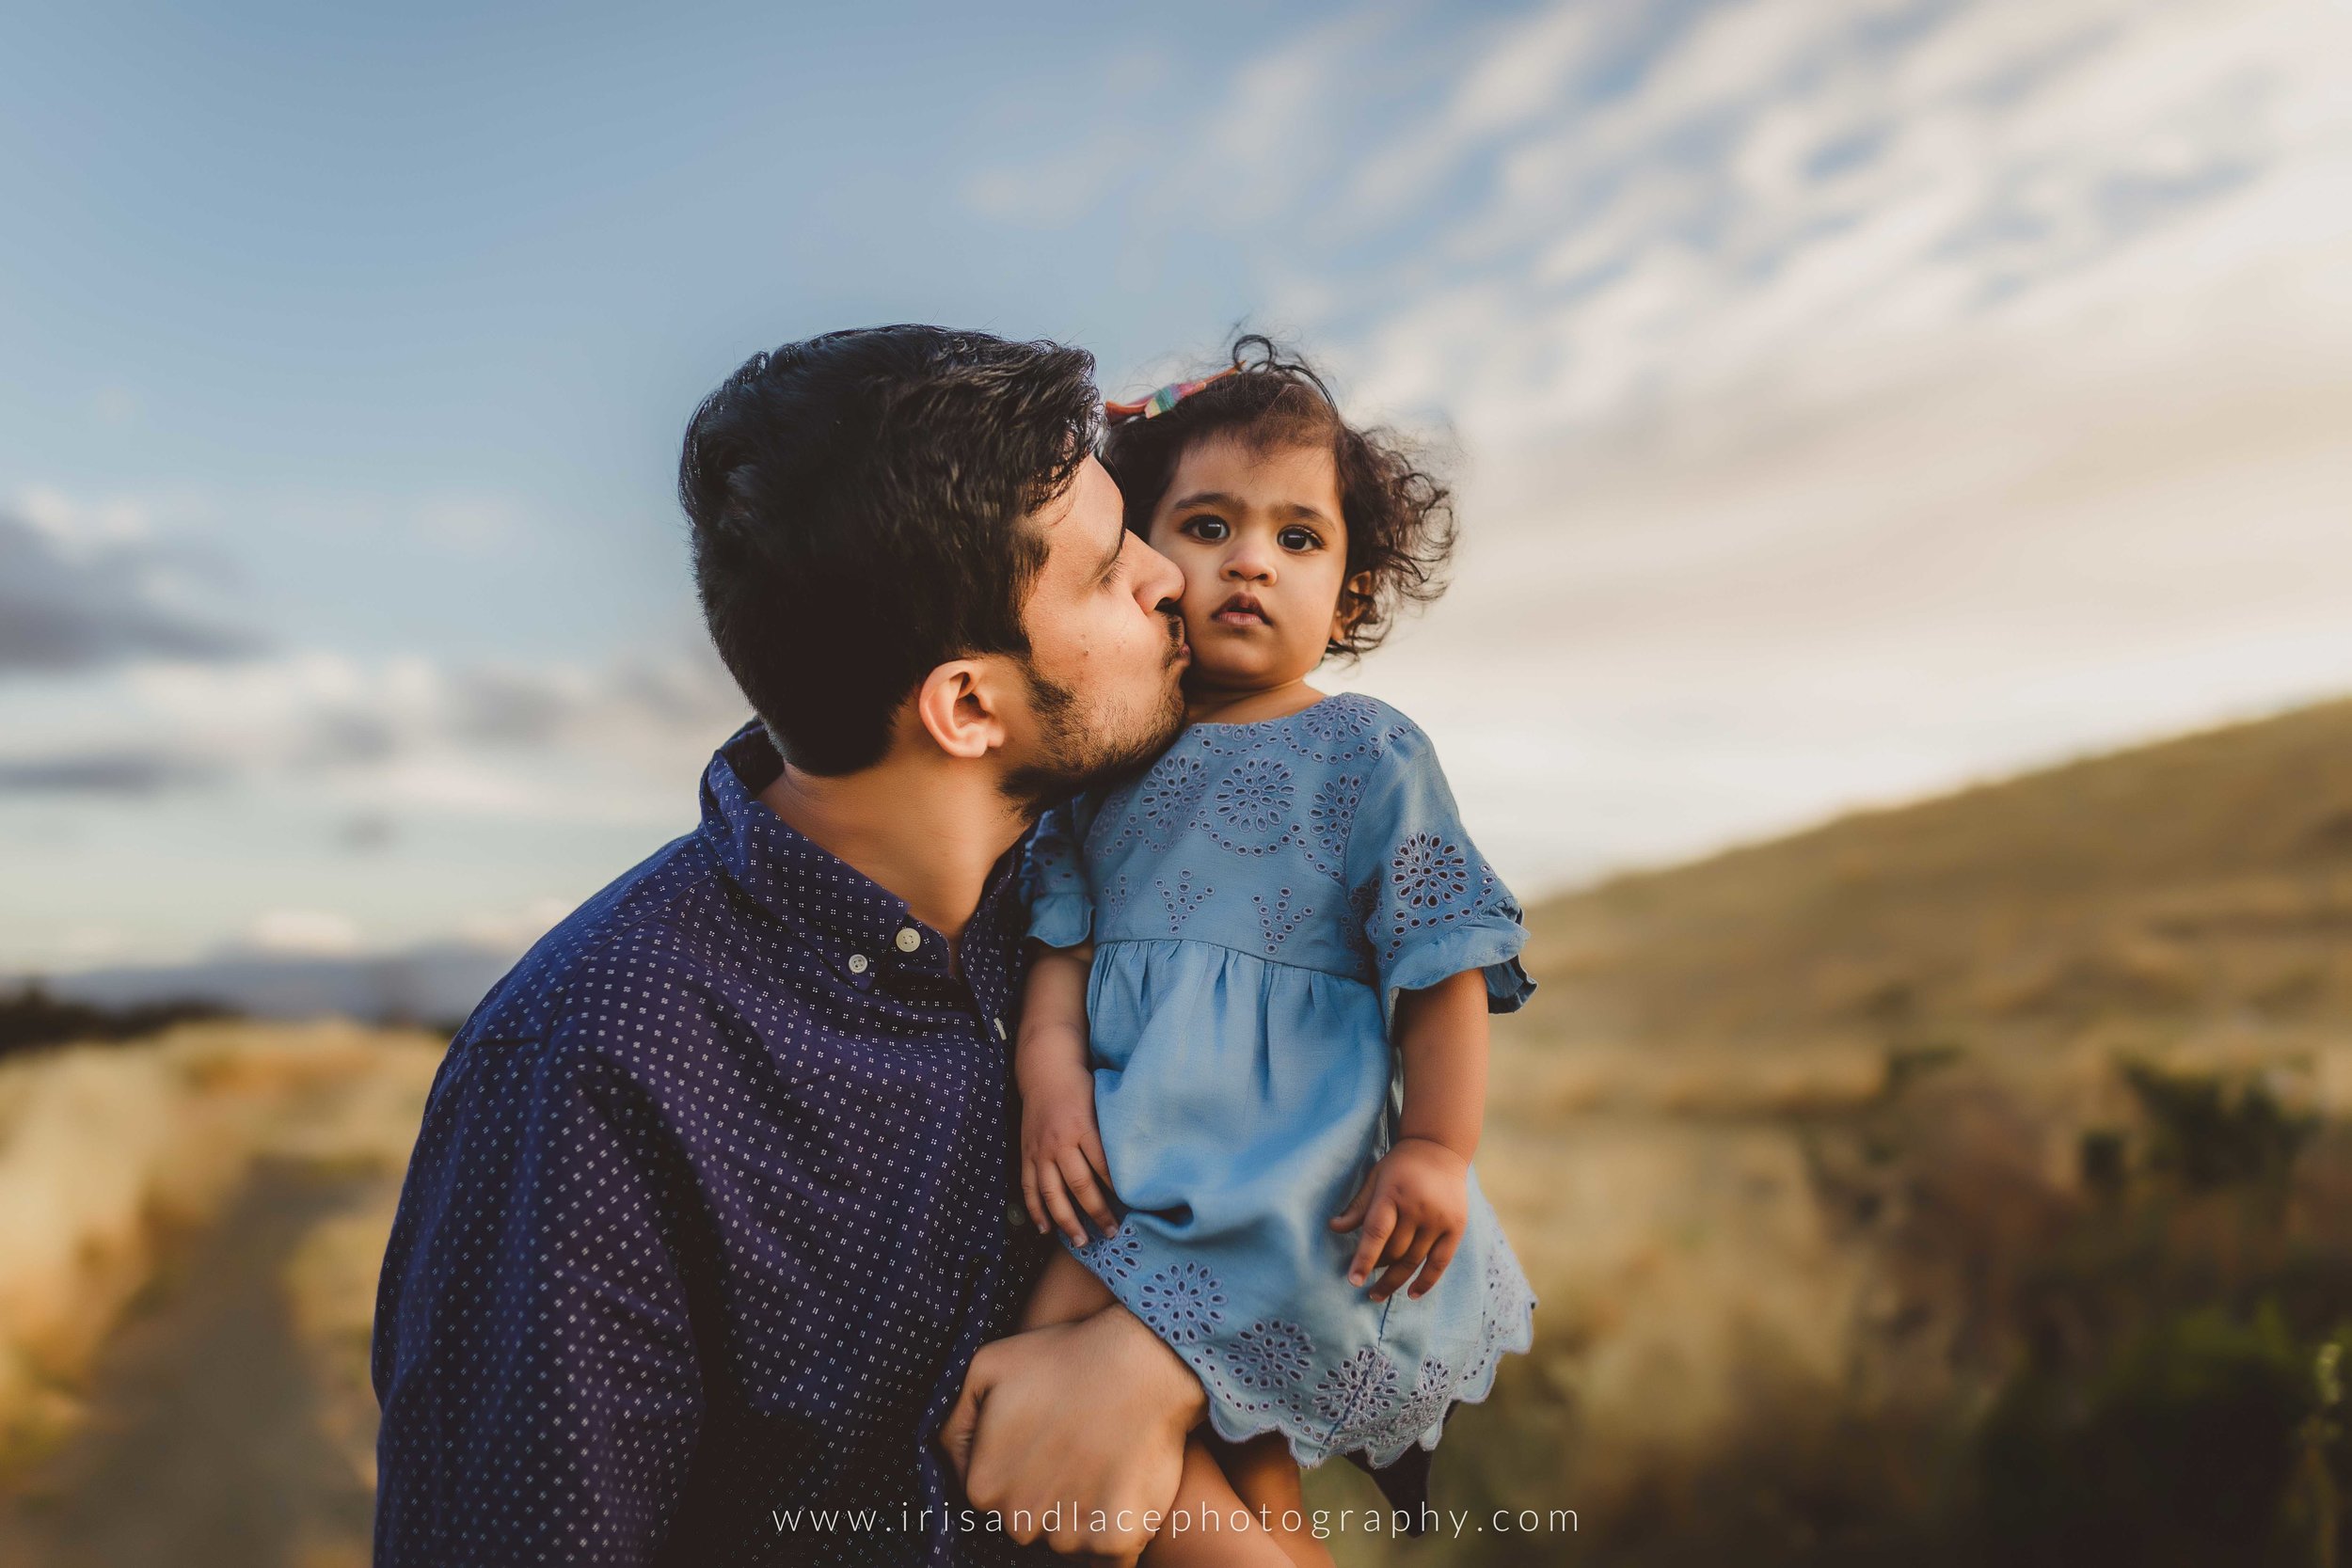 Mountain View Family Photography  |  Iris and Lace Photography